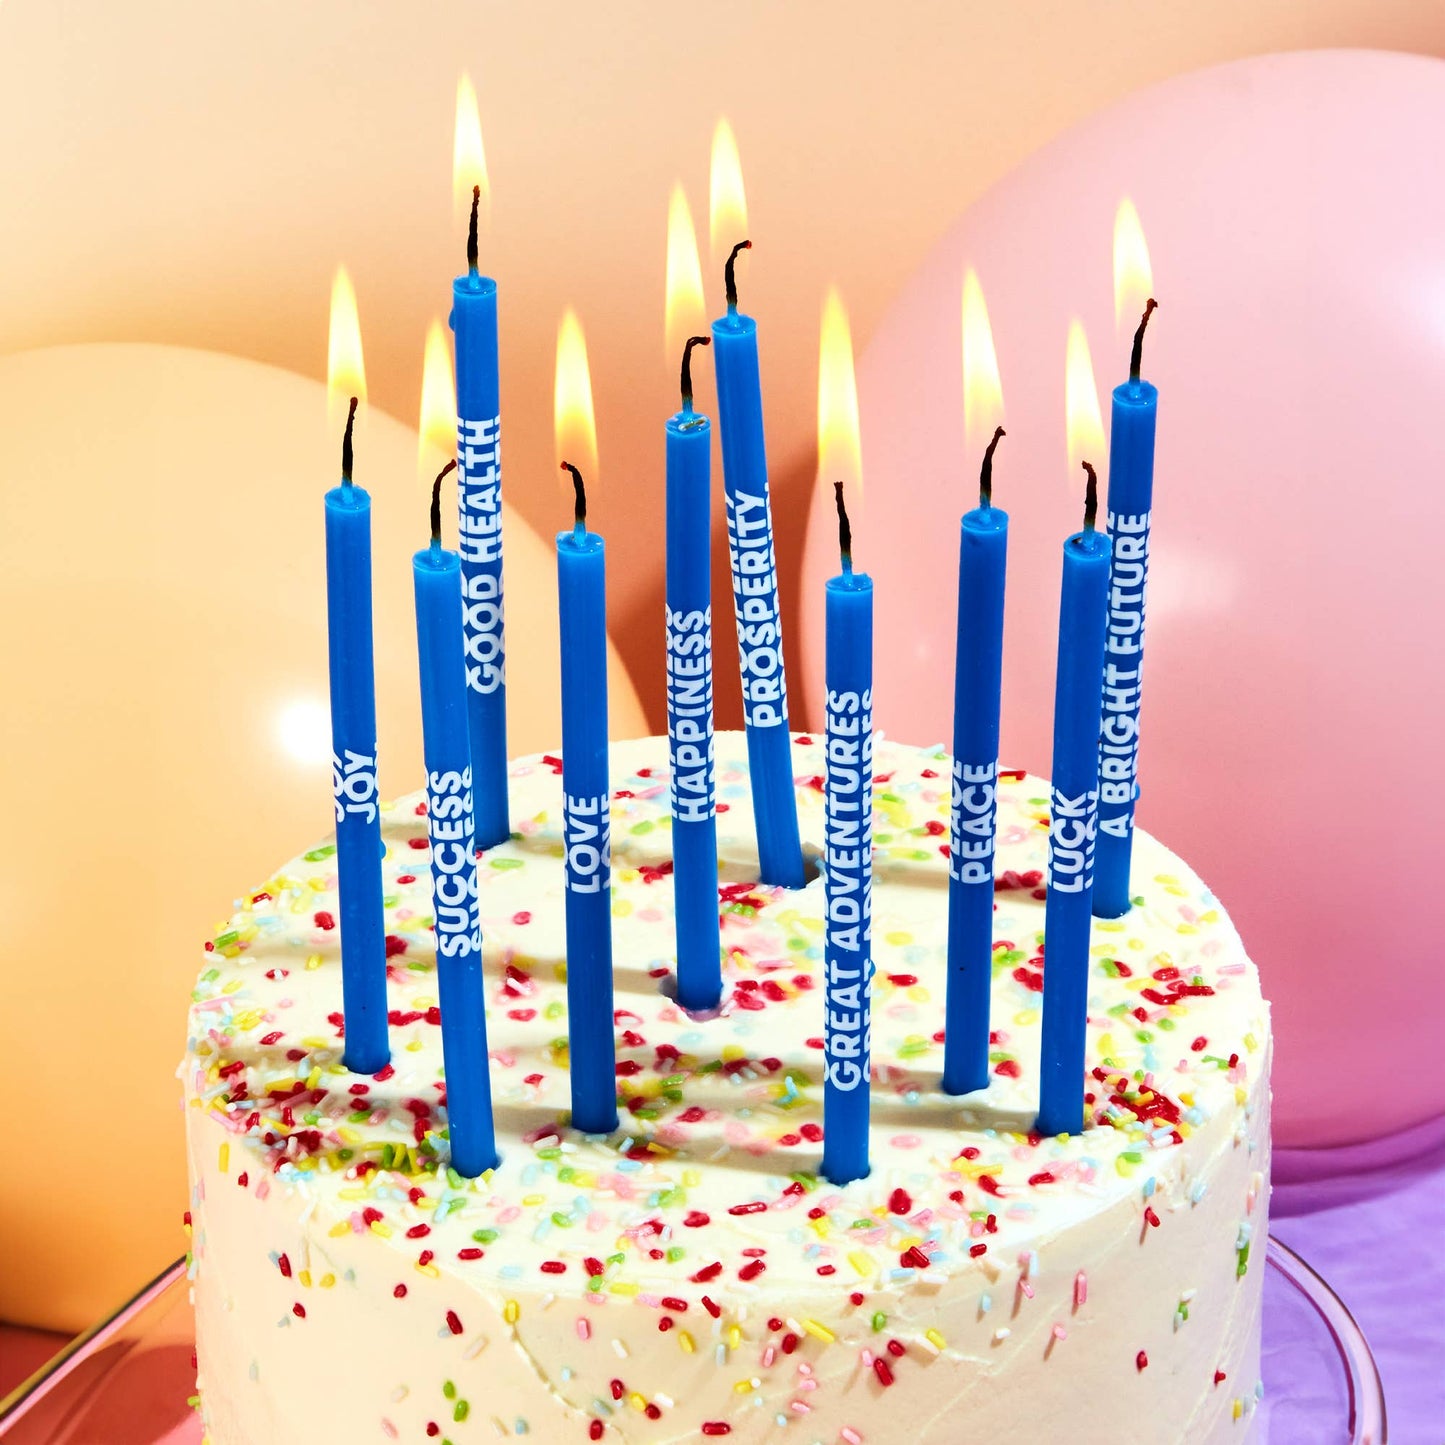 Wishing You: Birthday Candles (10 pack)